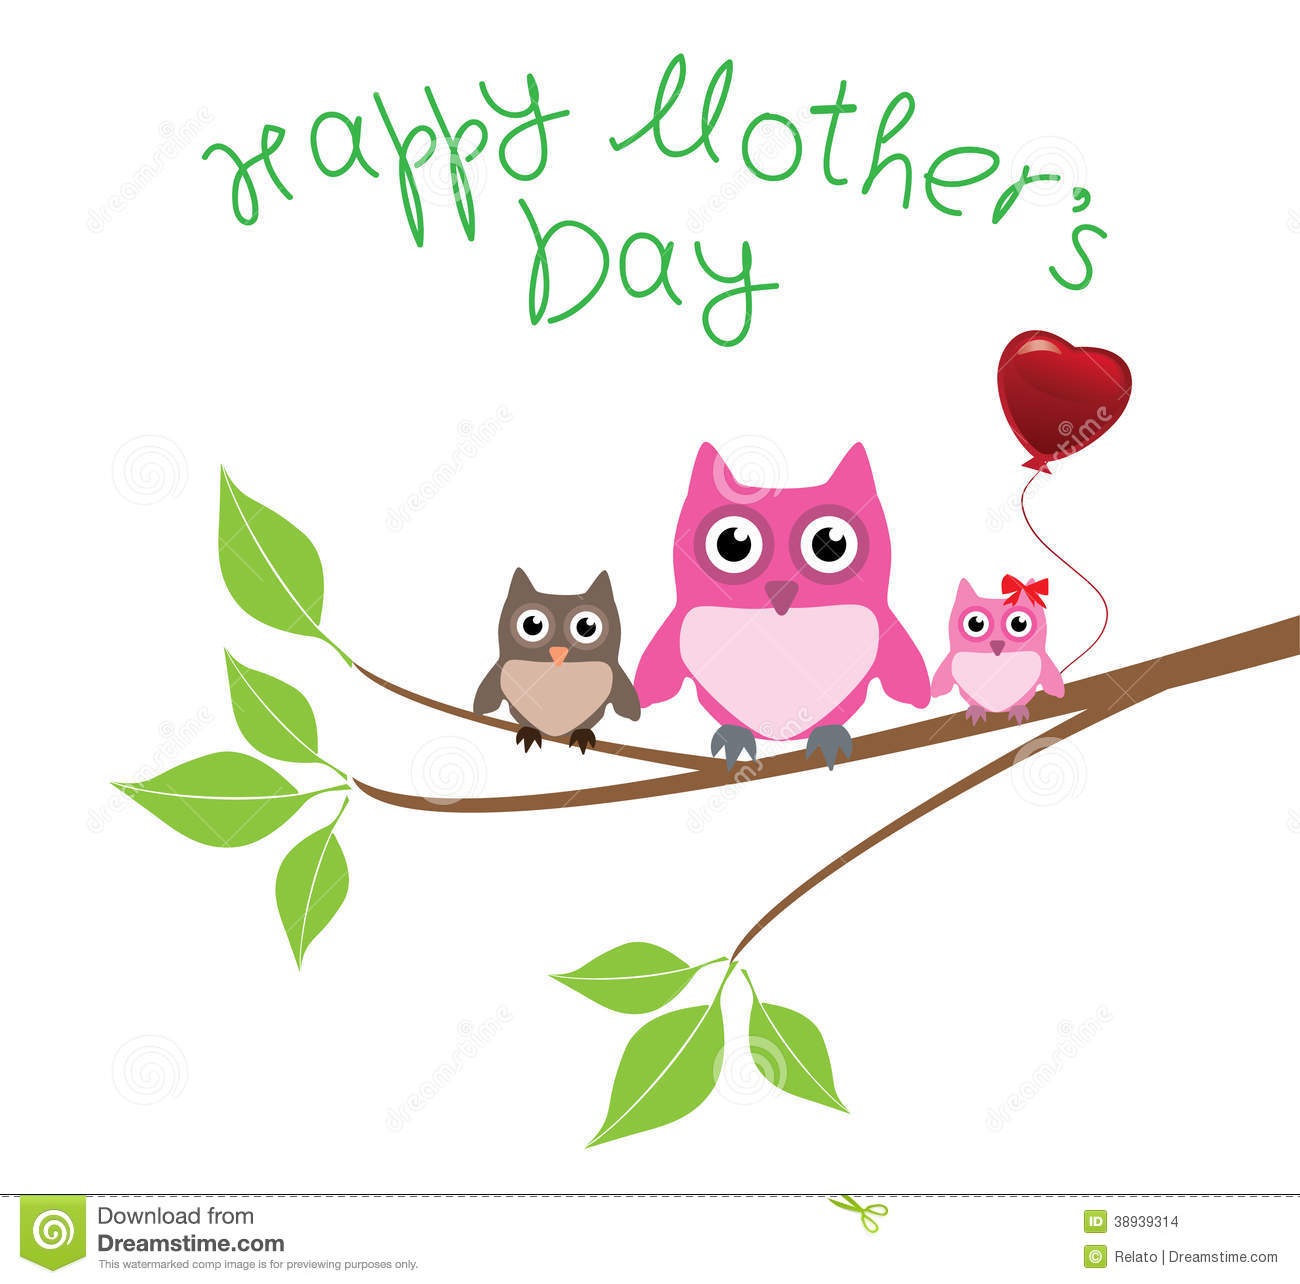 Happy Mother's Day with Owl